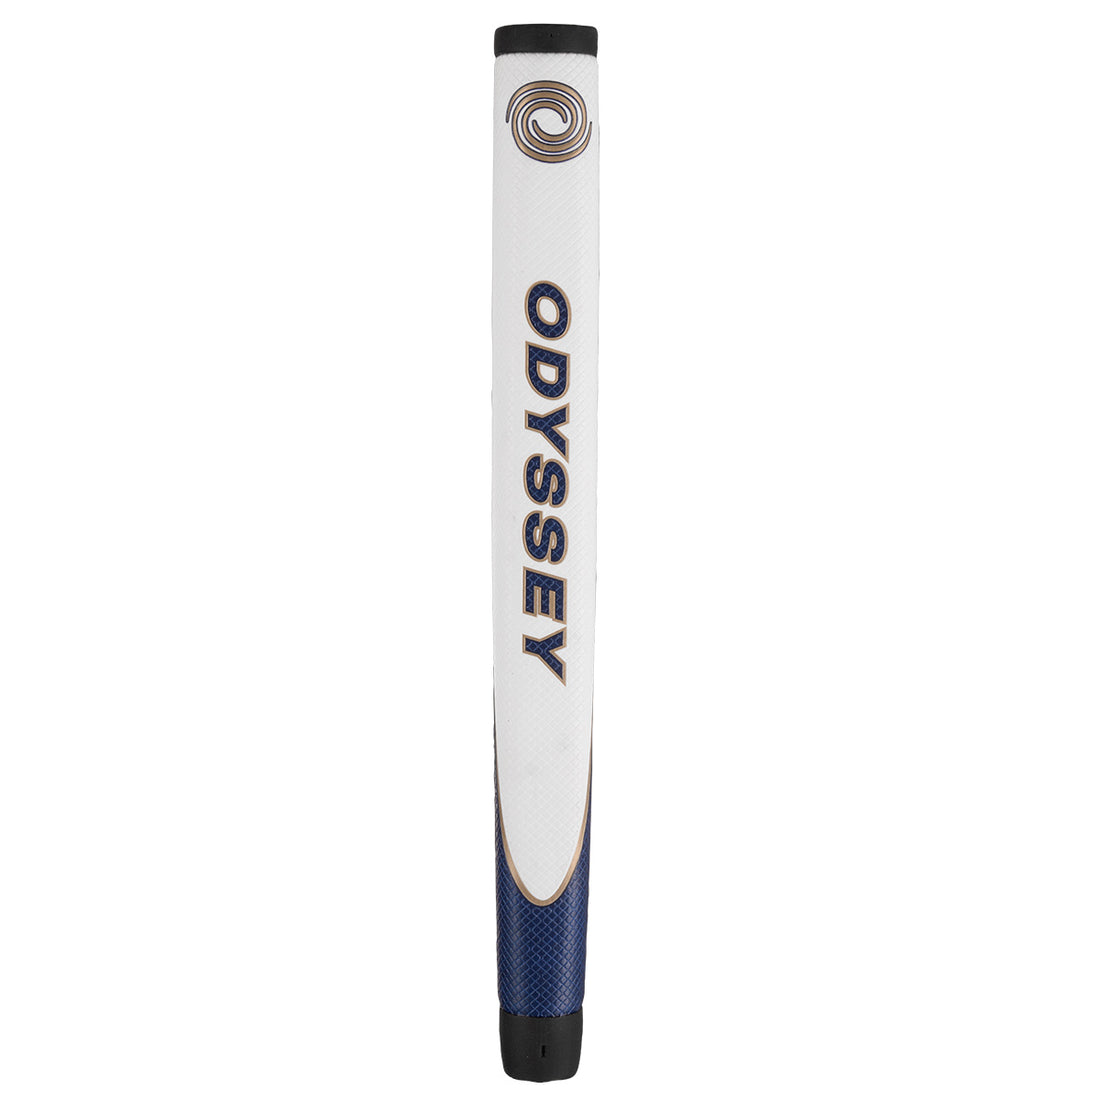 ODYSSEY Ai-ONE MILLED ELEVEN T DOUBLE BEND PISTOL PUTTER